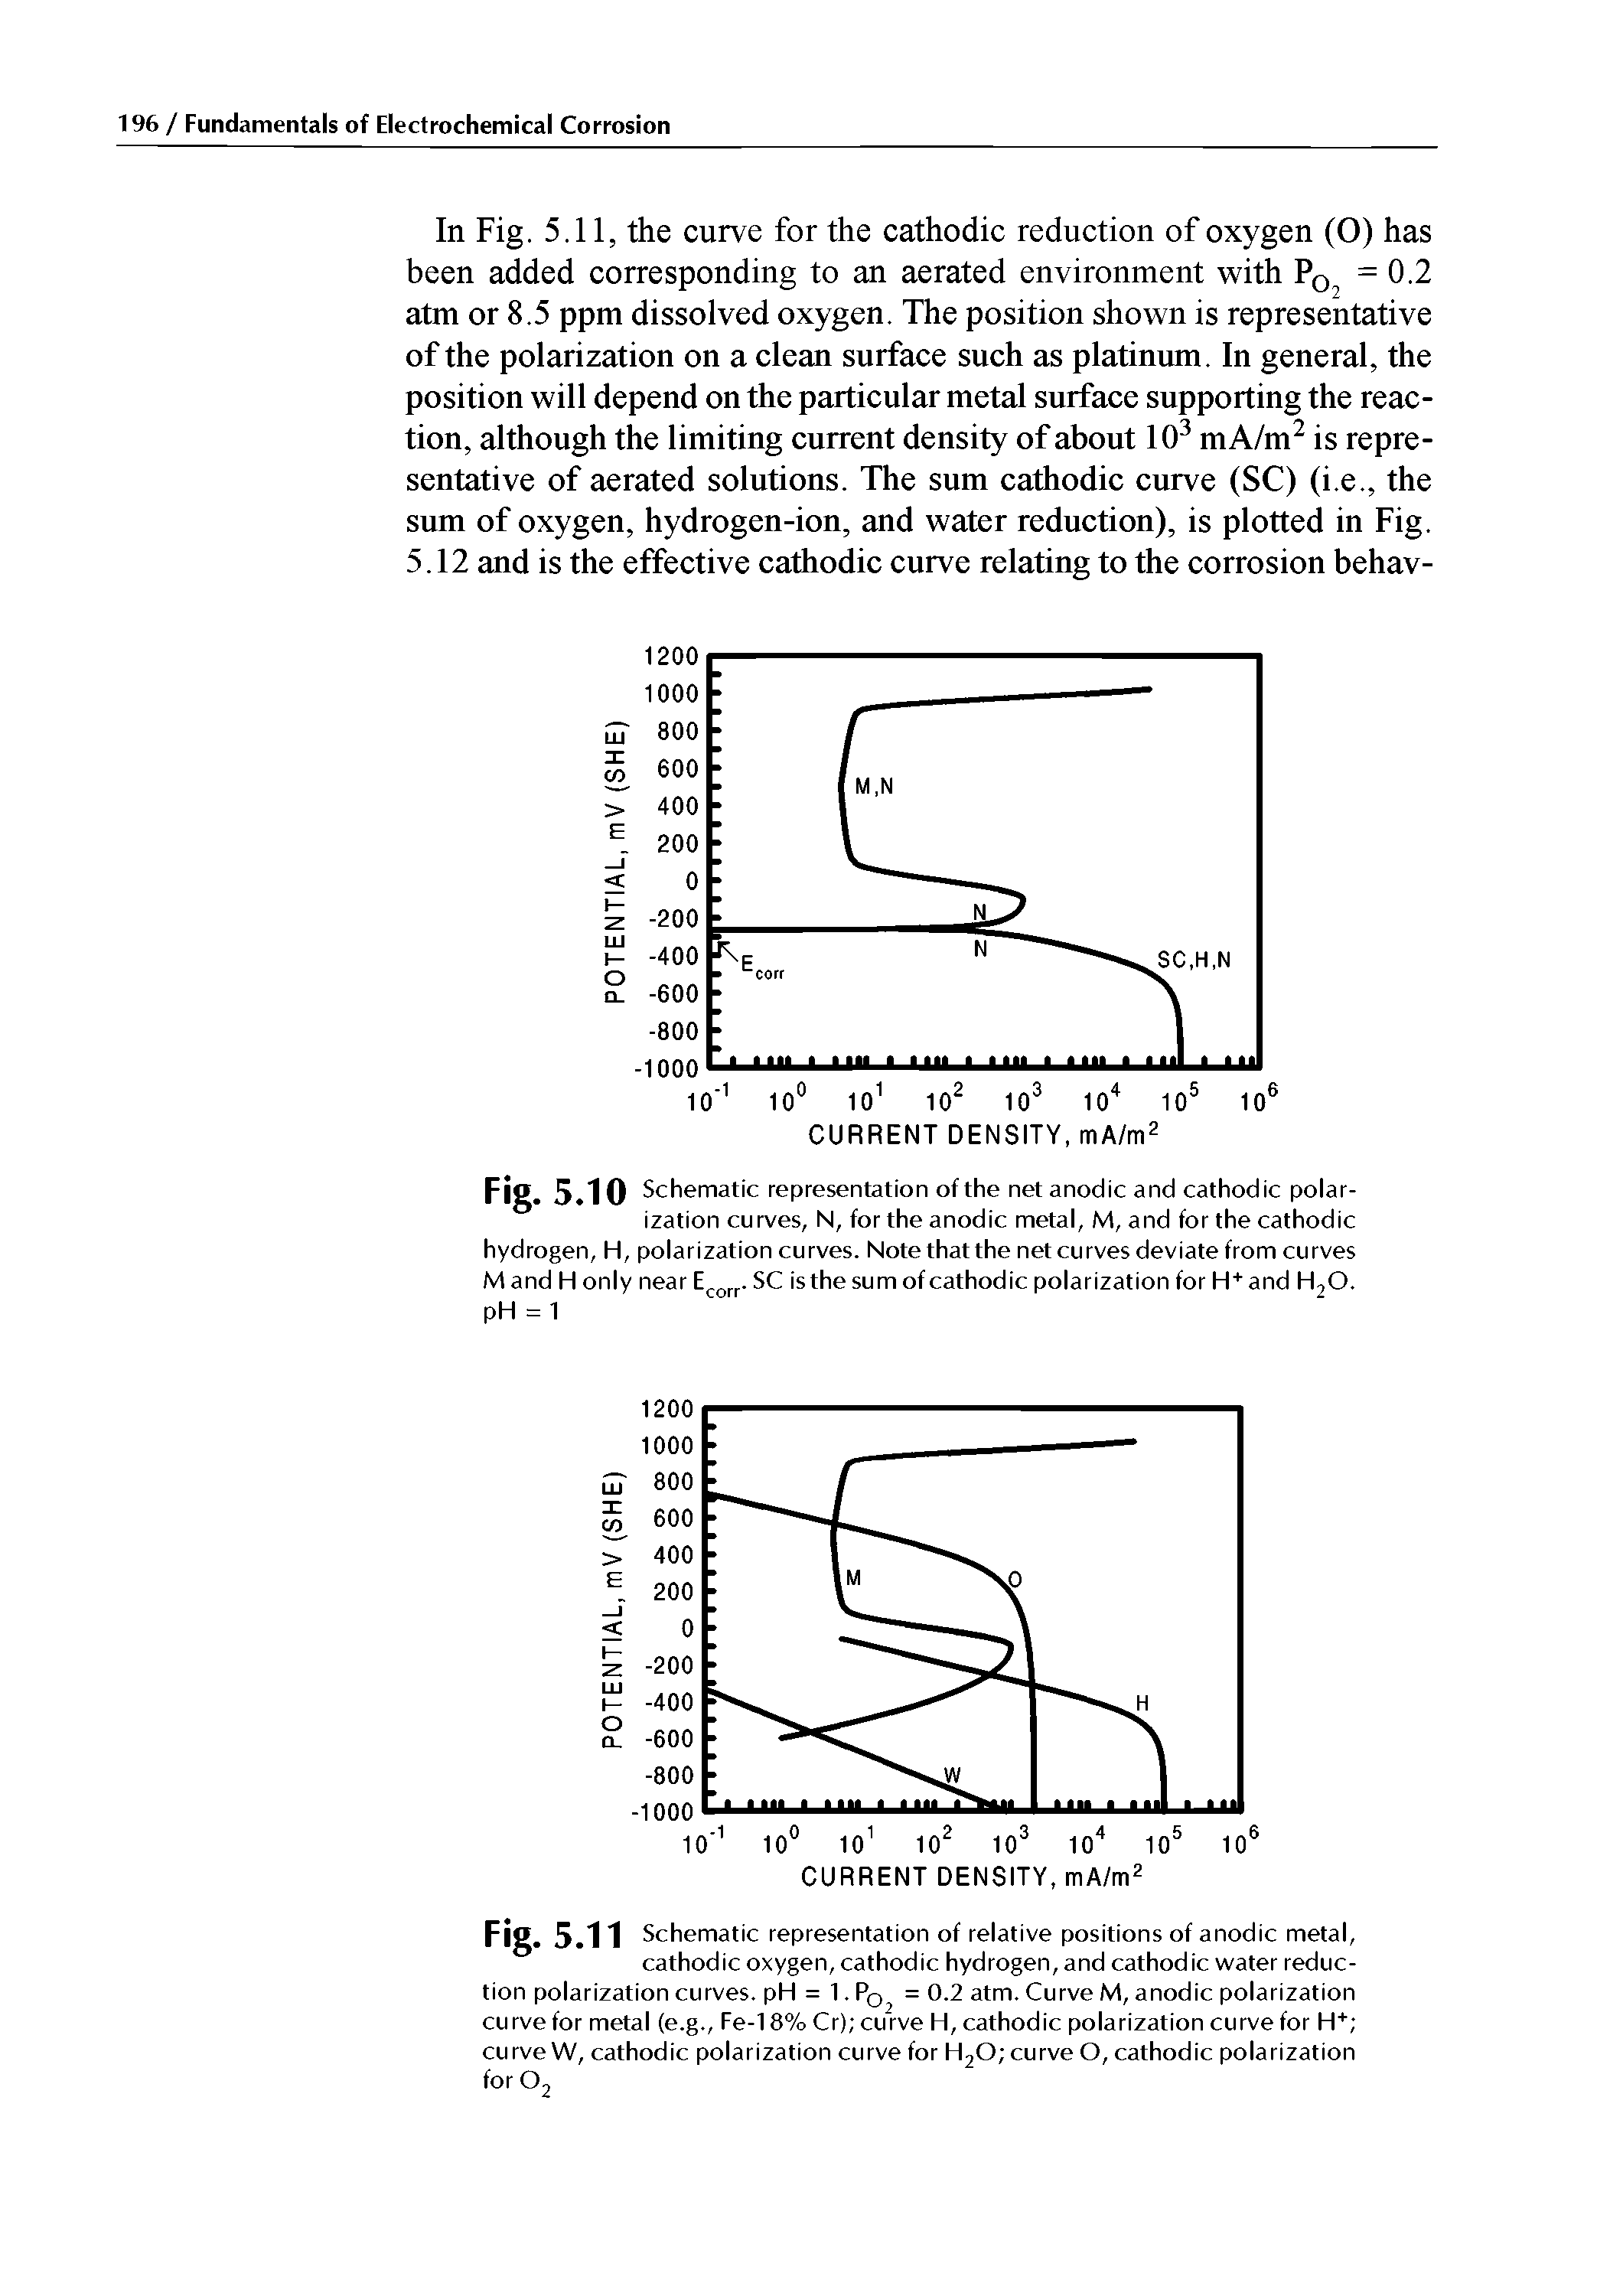 Fig. 5.11 Schematic representation of relative positions of anodic metal, cathodic oxygen, cathodic hydrogen, and cathodic water reduction polarization curves. pH = 1. Po, = 0-2 atm. Curve M, anodic polarization curve for metal (e.g., Fe-18% Cr) curve H, cathodic polarization curve for H+ curve W, cathodic polarization curve for H20 curve O, cathodic polarization for 02...